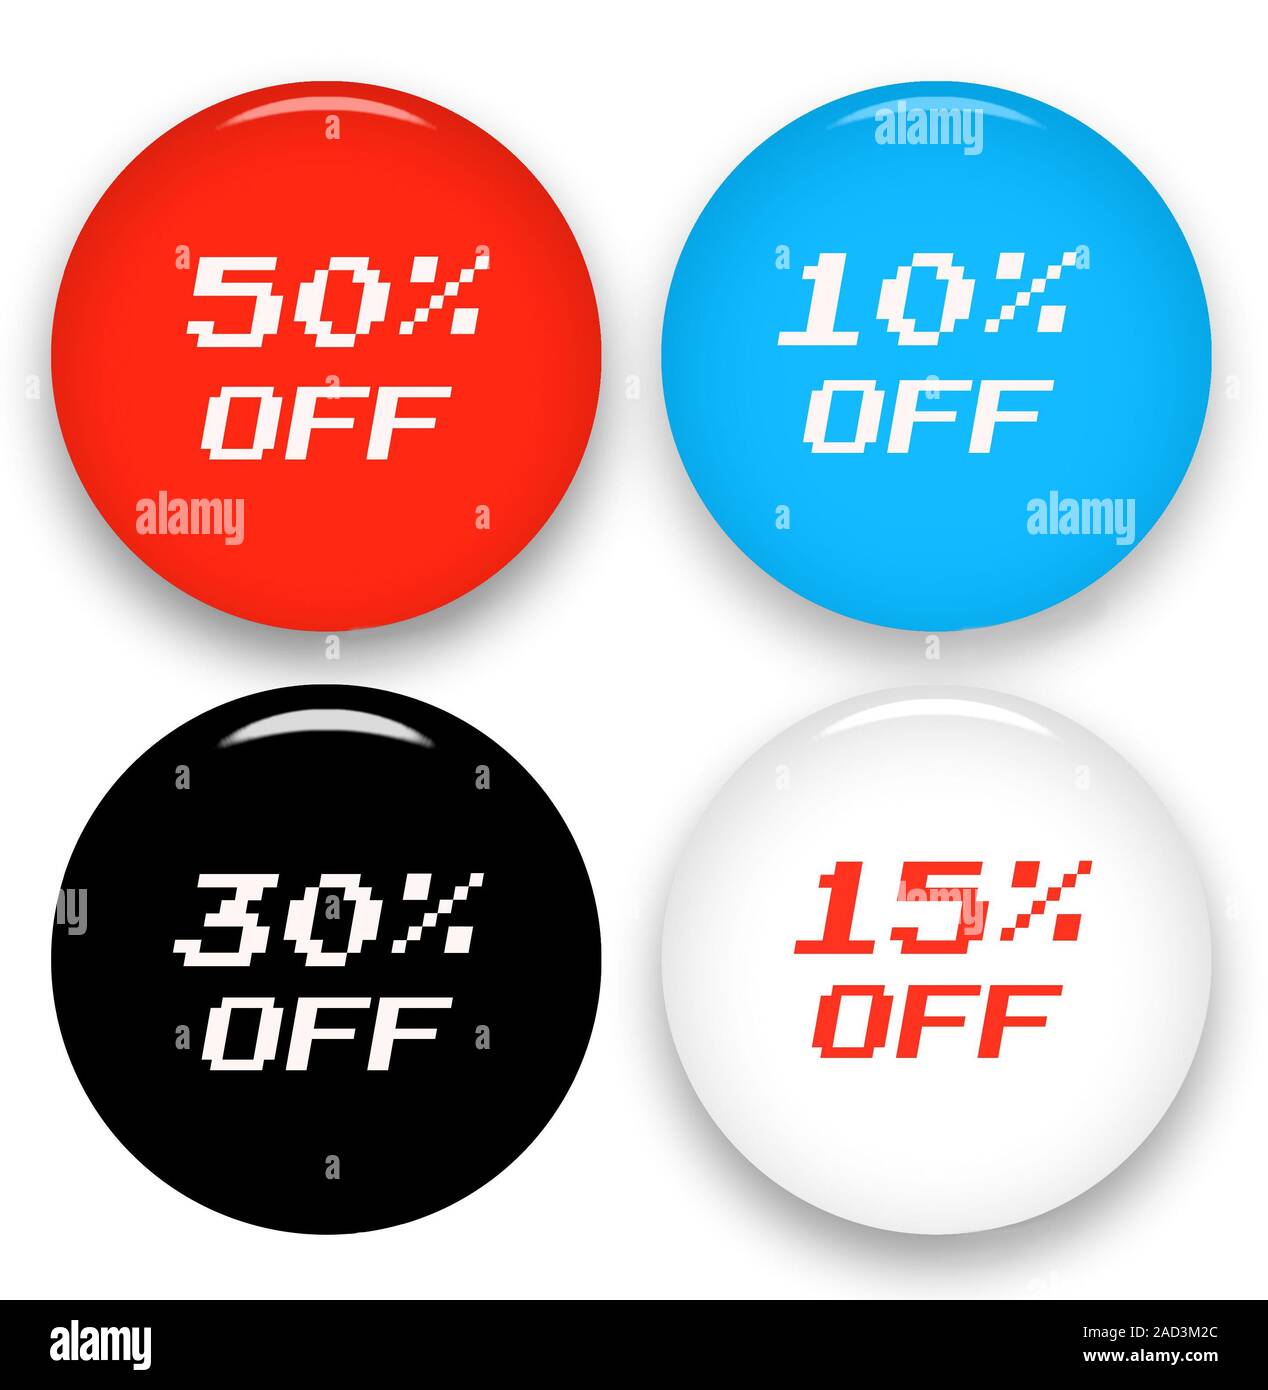 Sale discount web icons. Offer price symbols. 10, 15, 30 and 50 percent off reduction price signs. Stock Photo